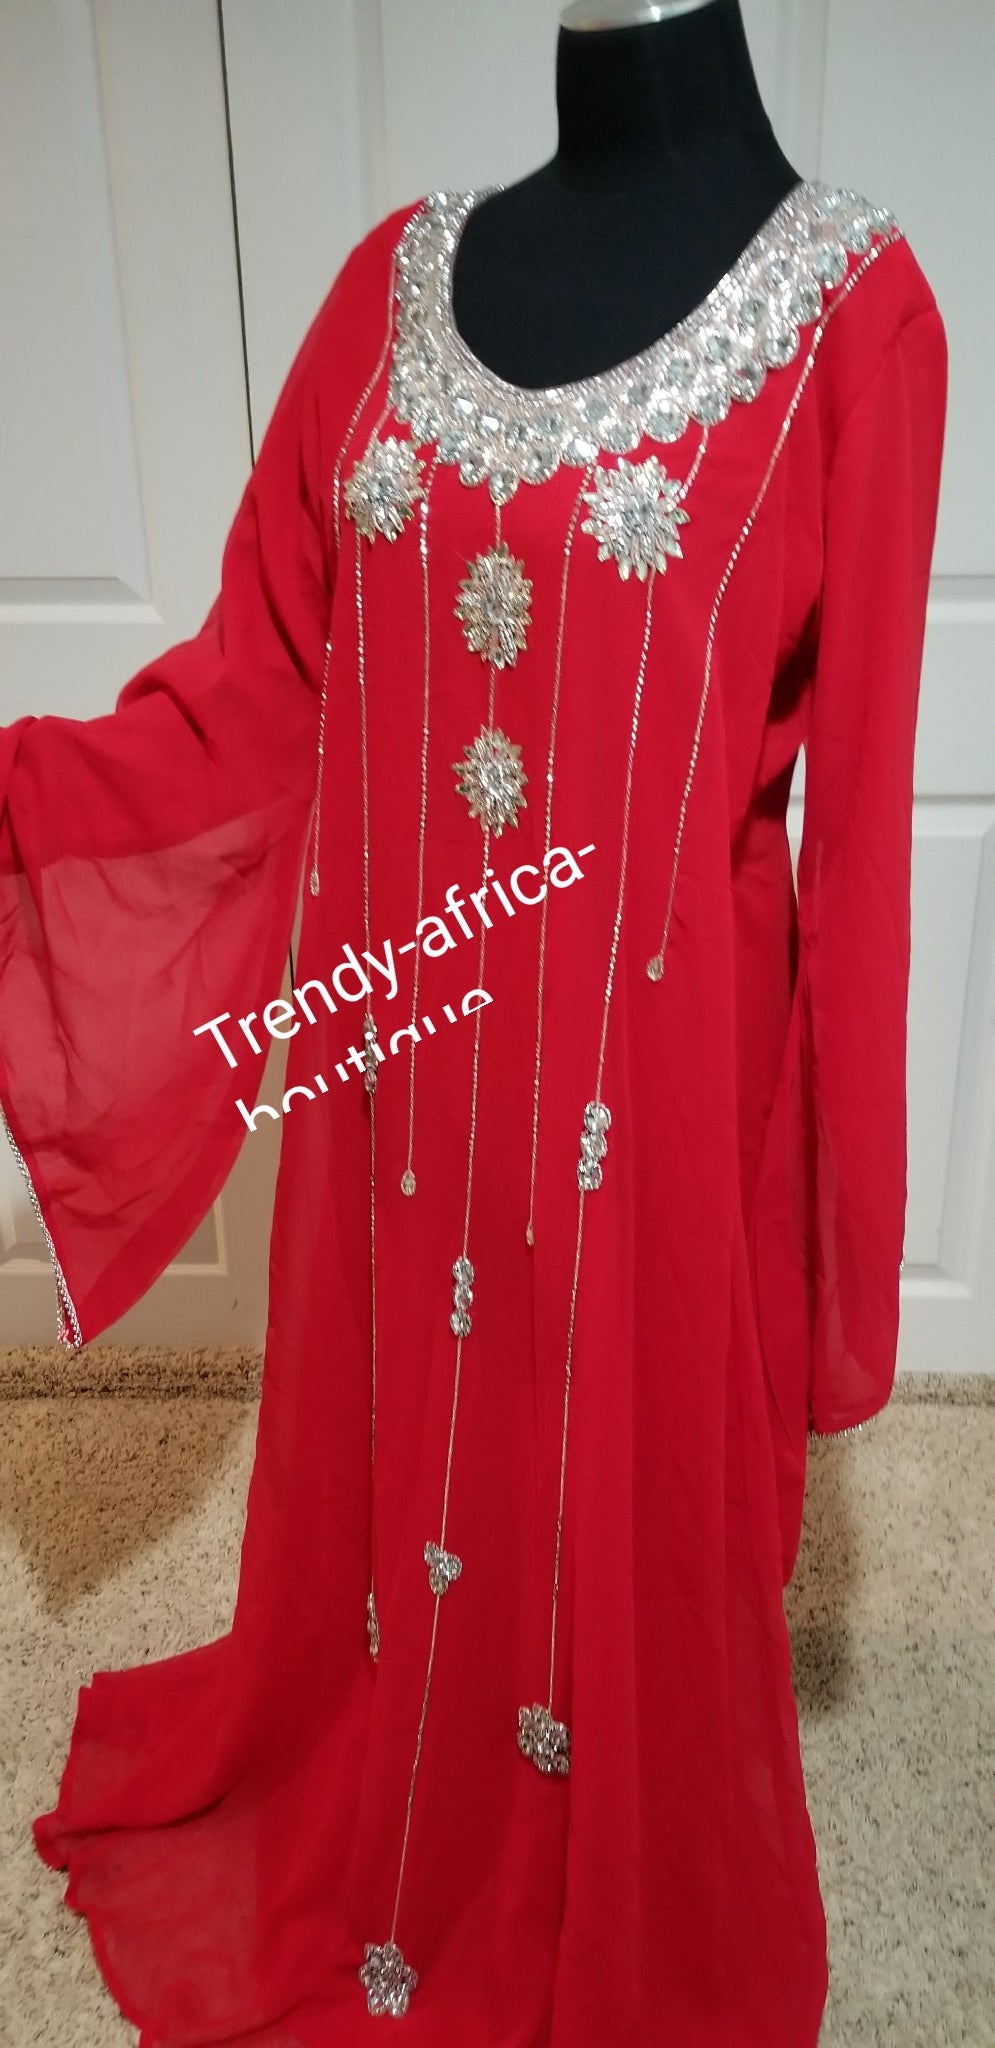 Red free flowimg Kaftan dress on sale. 60' long size Medium fit 44" Burst. Inner dress have belt for easy adjustments. Beaded with dazzling Crystal stones to perfection